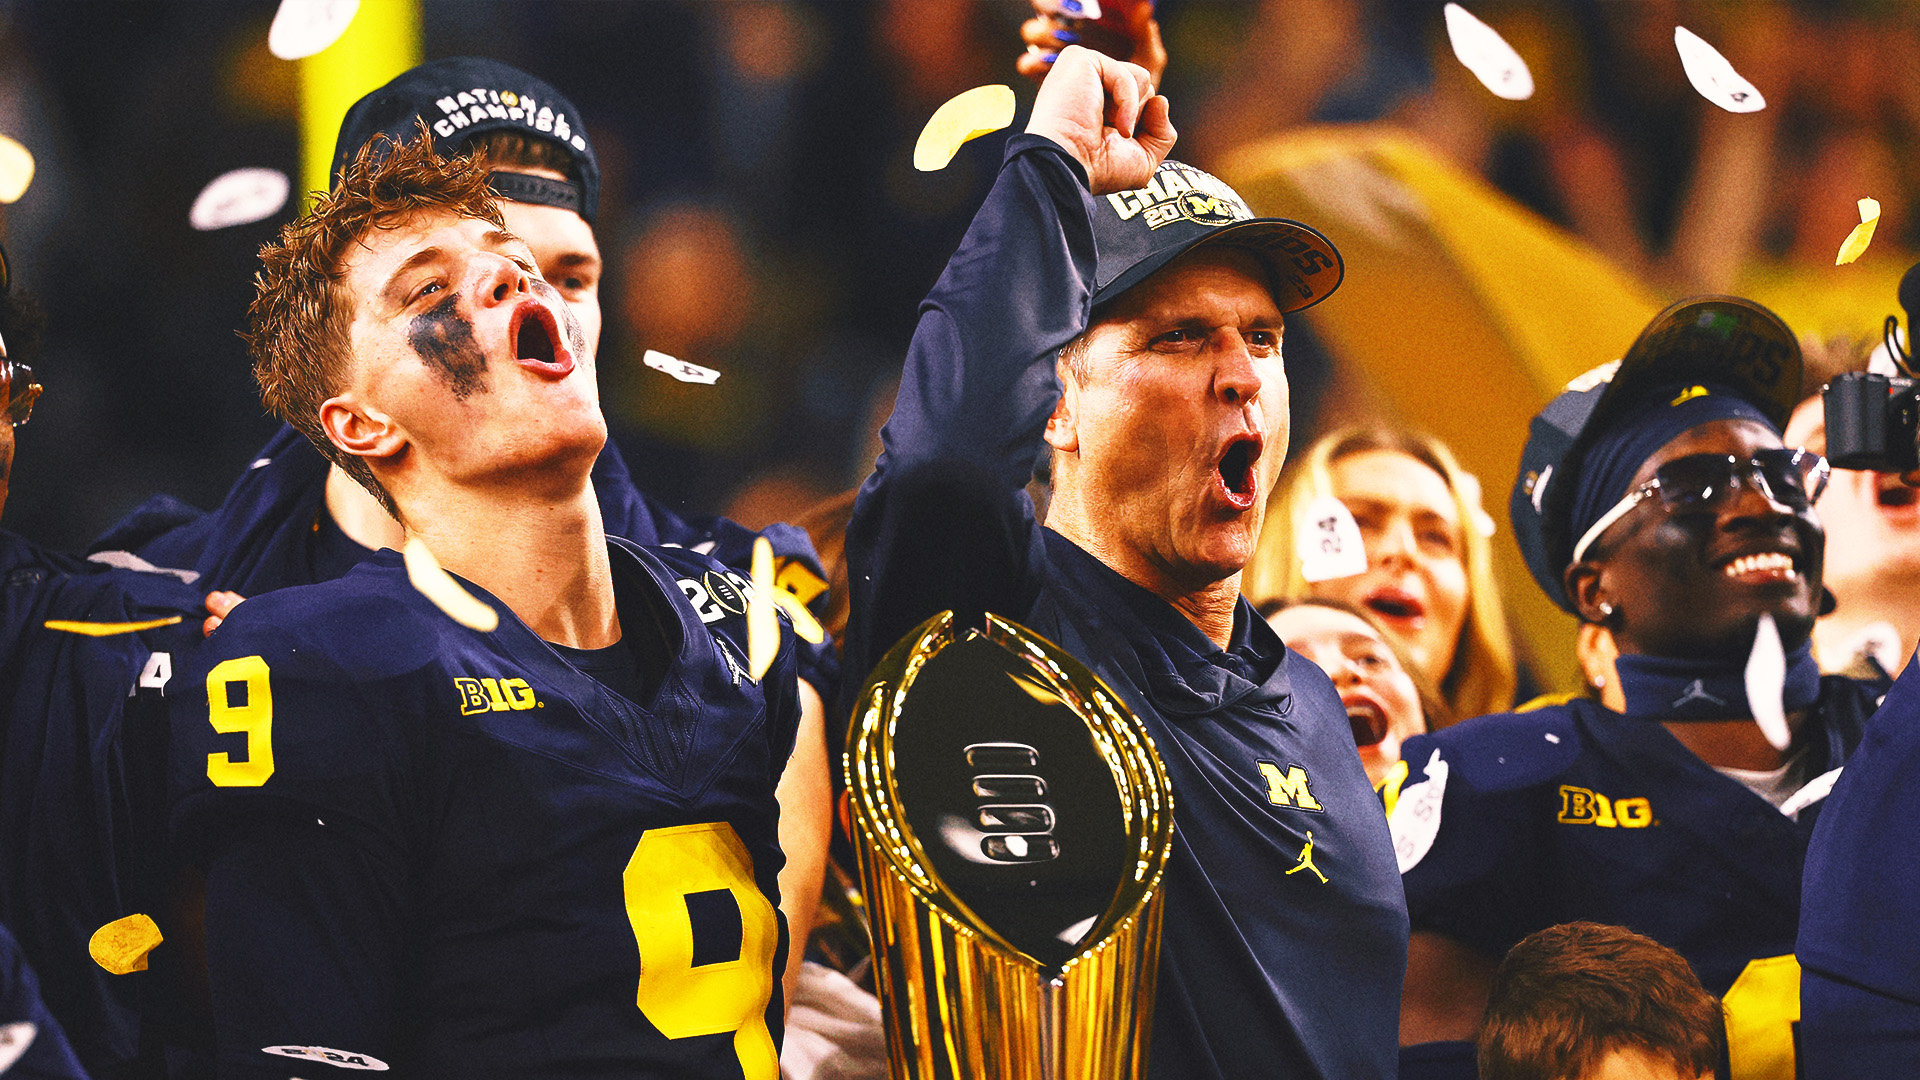 Michigan's repeat title hopes hang on decisions from Jim Harbaugh, star players